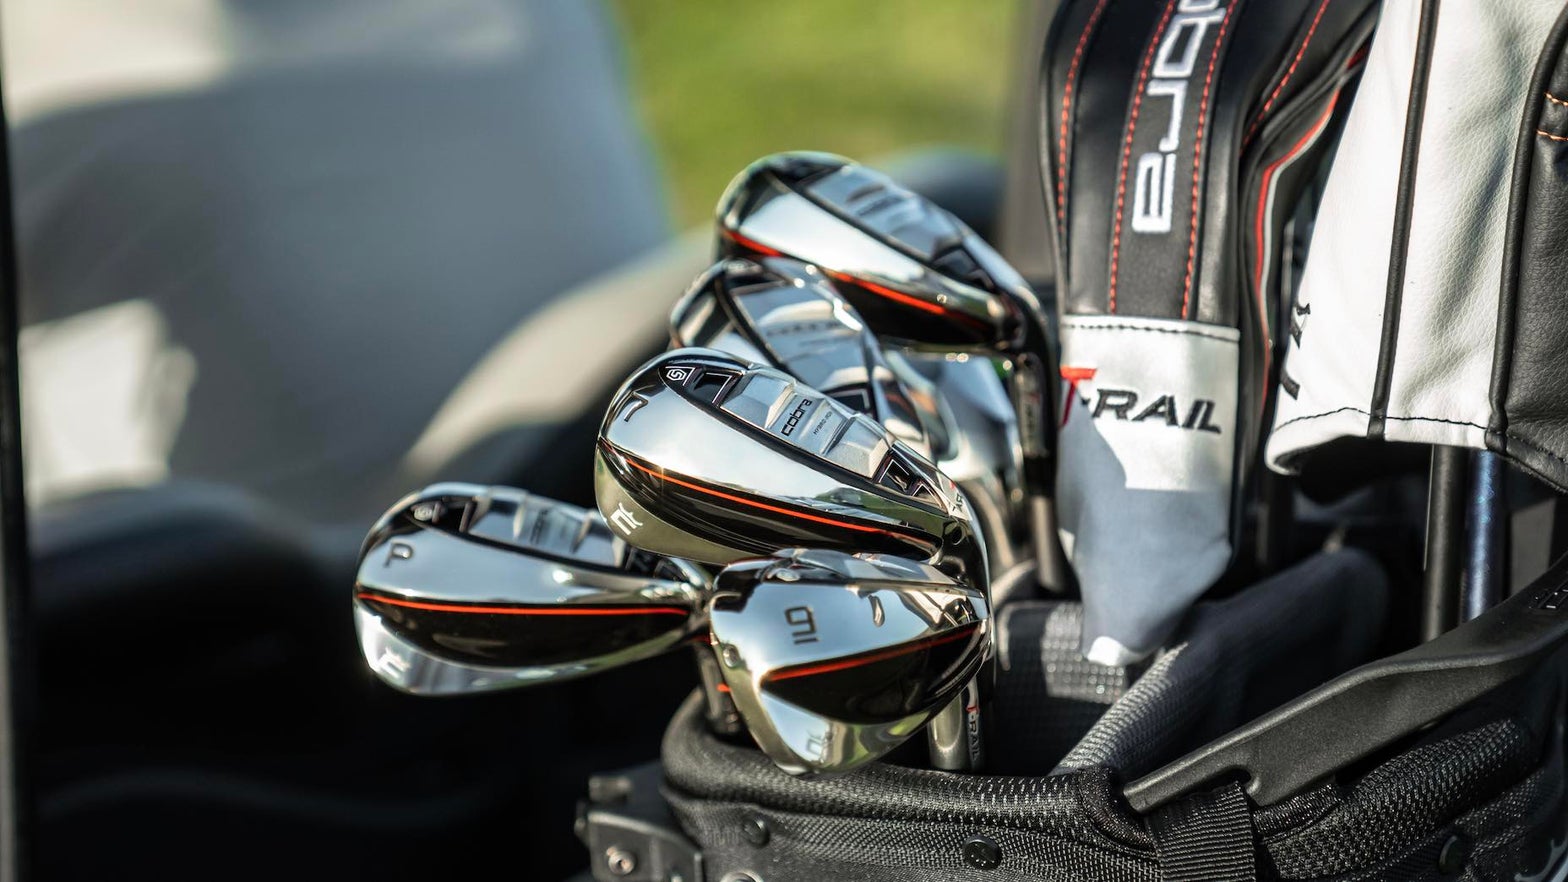 Cobra T-Rail hybrid irons with H.O.T. Face expertise: First Look